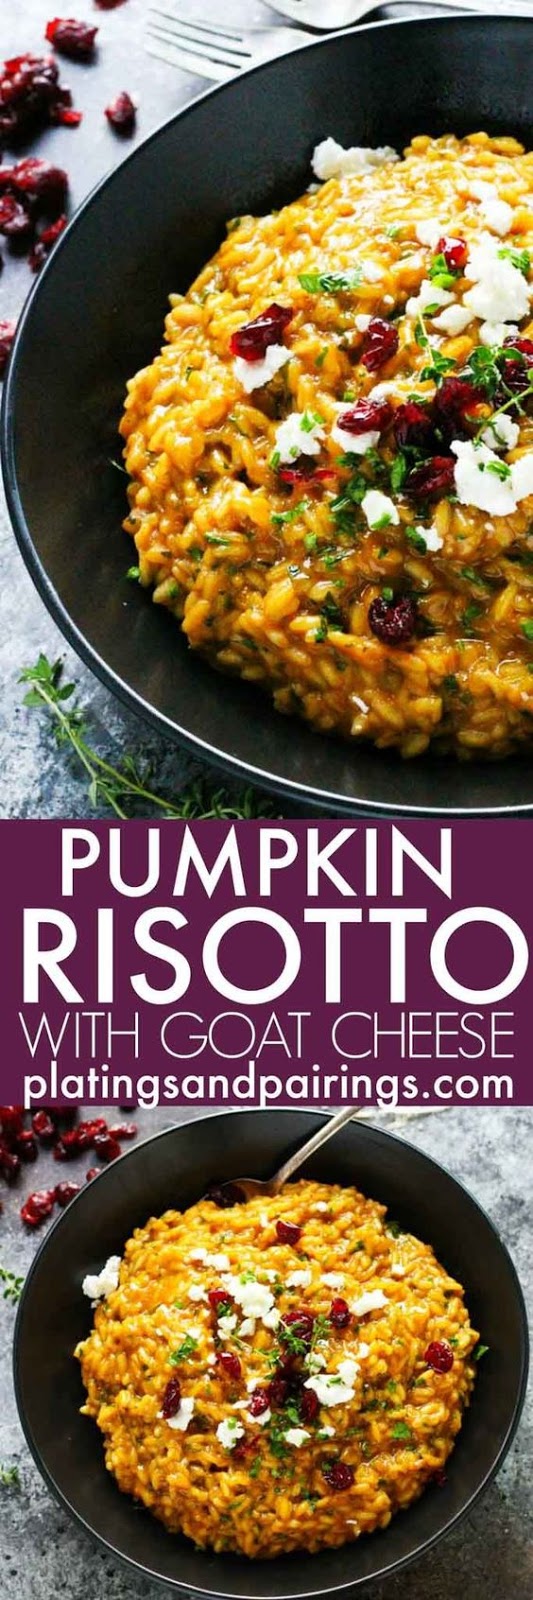 PUMPKIN RISOTTO WITH GOAT CHEESE & DRIED CRANBERRIES